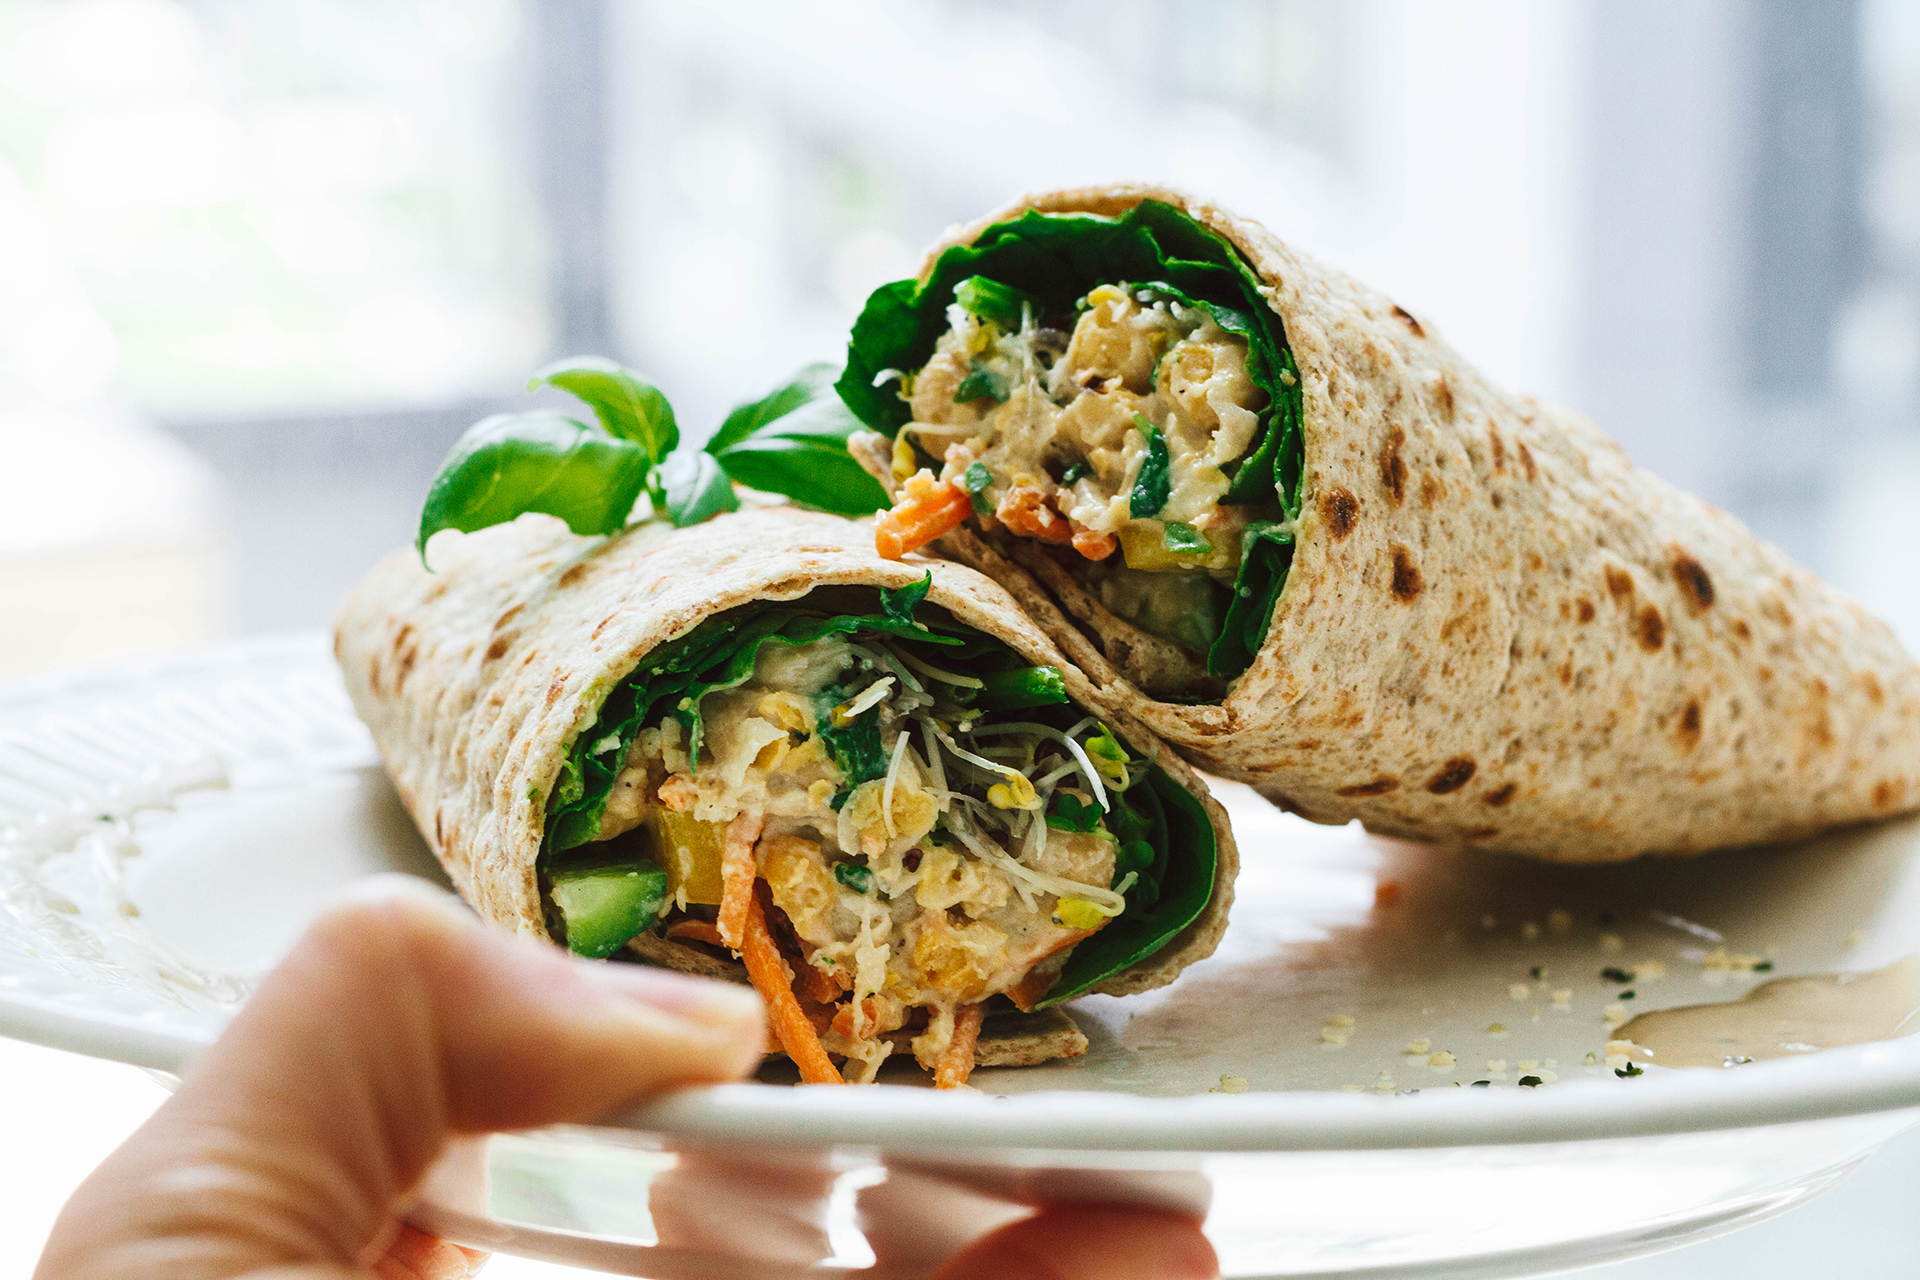 Lentil Tahini Wraps with Carrots and Broccoli